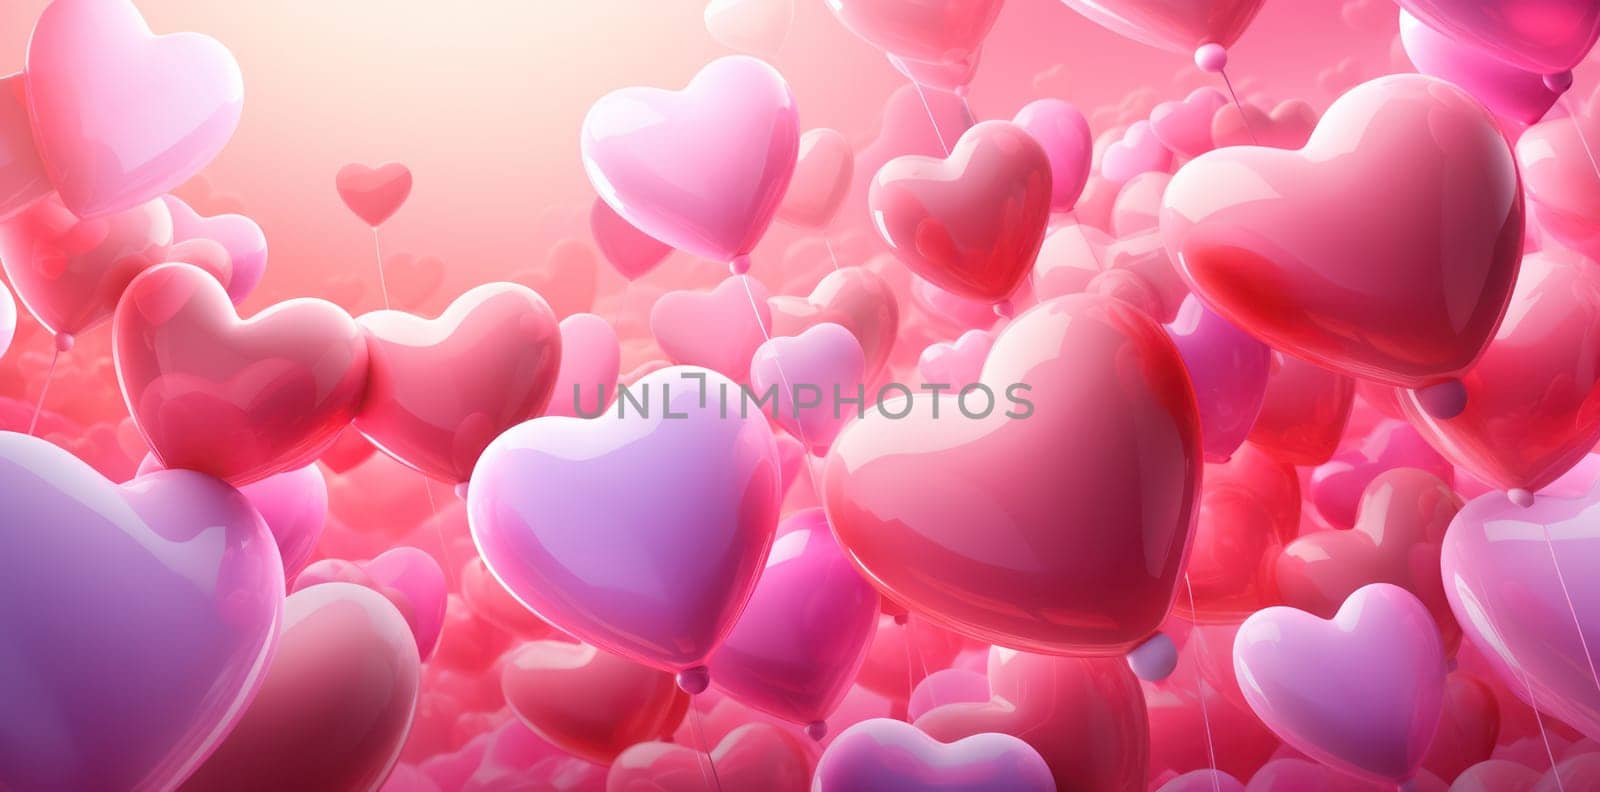 Romantic Valentine's Love: A Heartwarming Celebration of Red, Pink, and Love on a Bright, Abstract Background by Vichizh